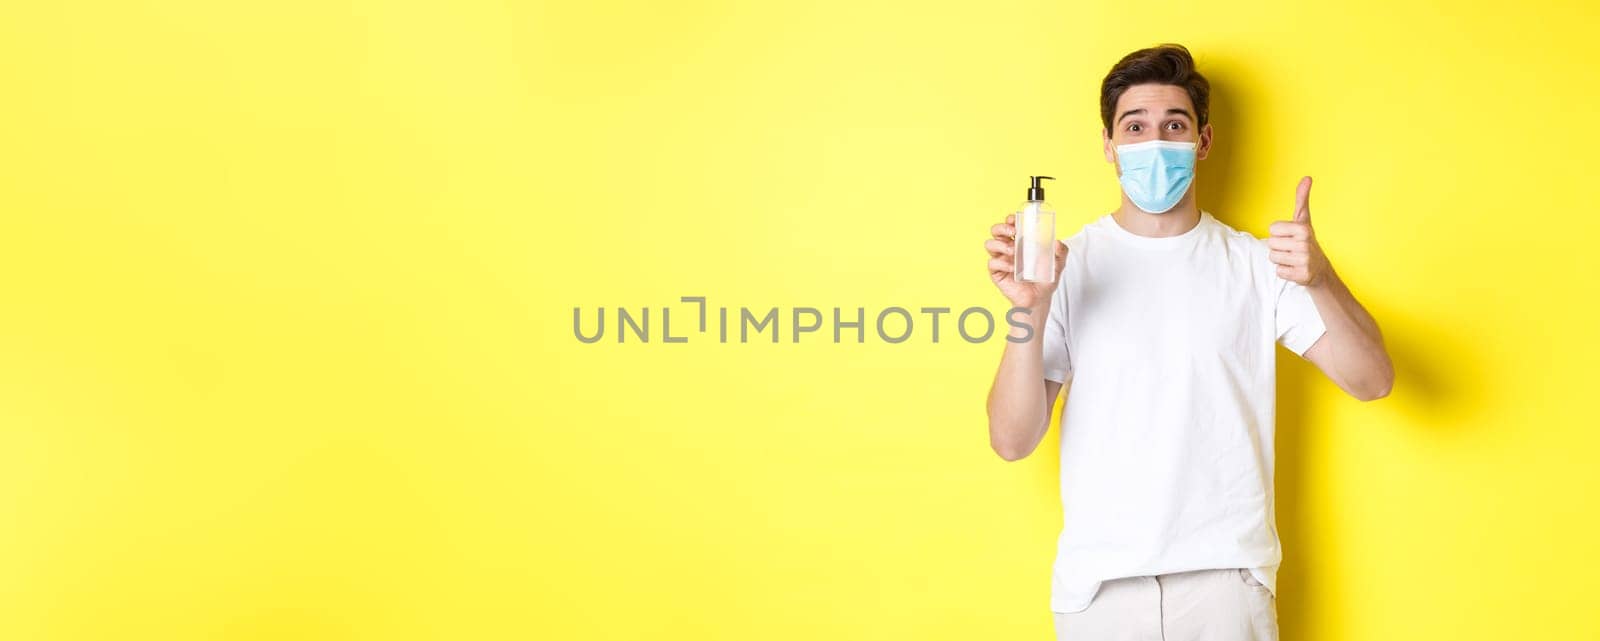 Concept of covid-19, quarantine and lifestyle. Satisfied young man in medical mask showing good hand sanitizer, thumbs up and recommending antiseptic, yellow background.